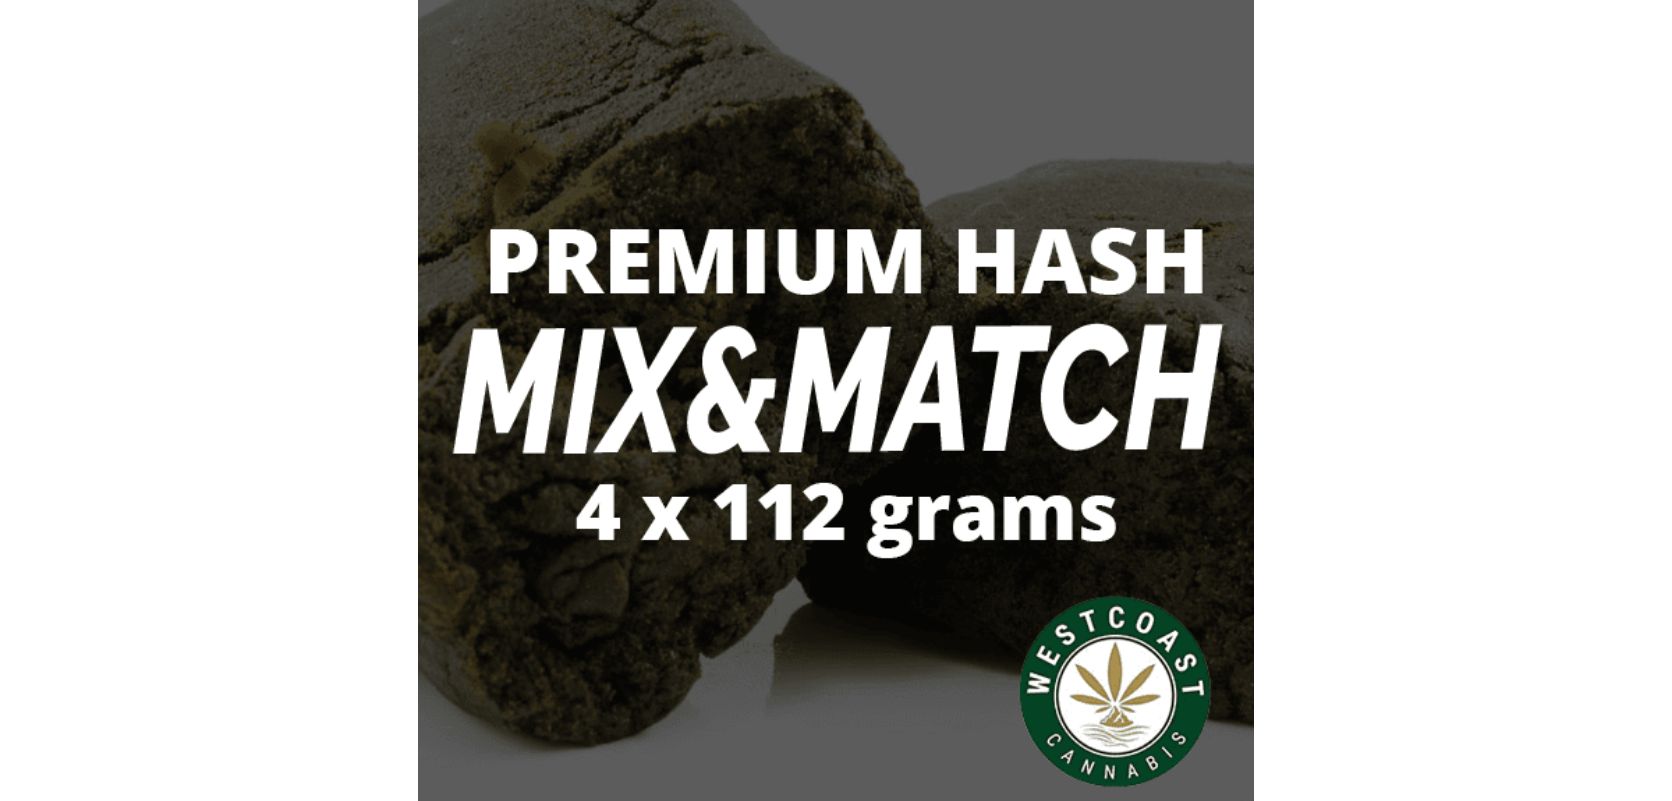 Order hash online in larger quantities, ensuring a steady supply of your favourite flavour or variety.